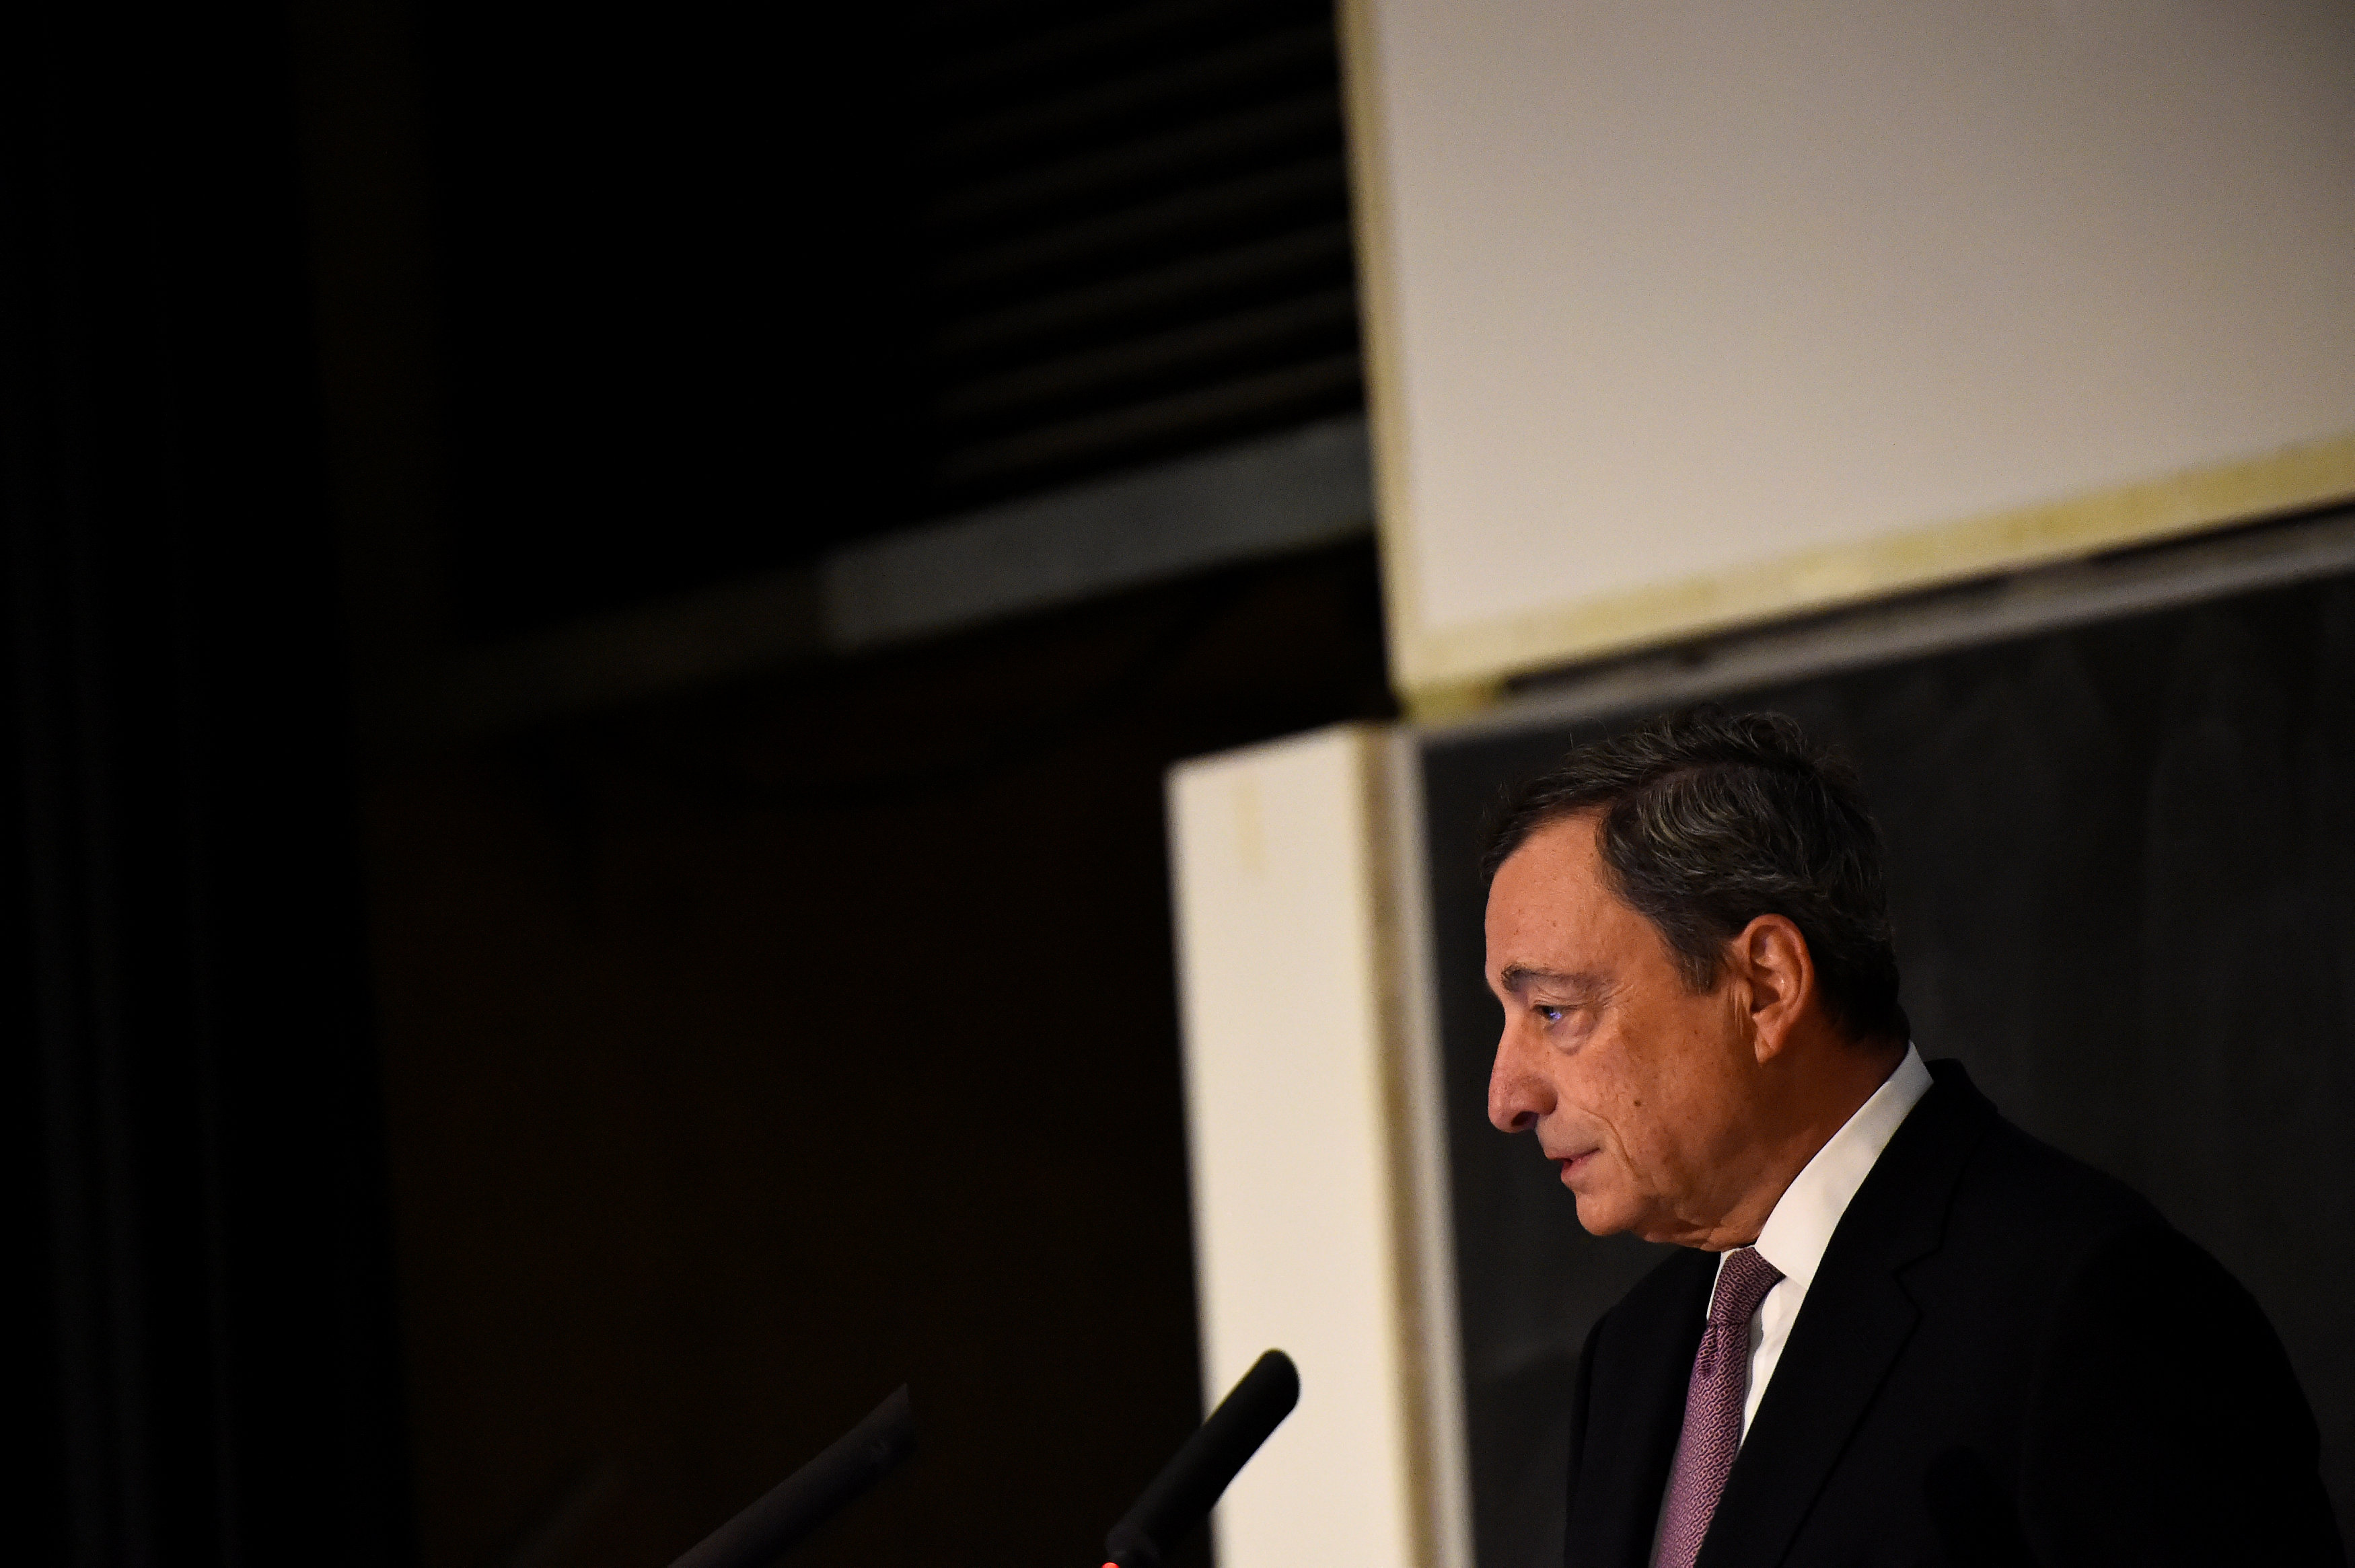 Europe's youth unemployment poses risk to democracy: Draghi